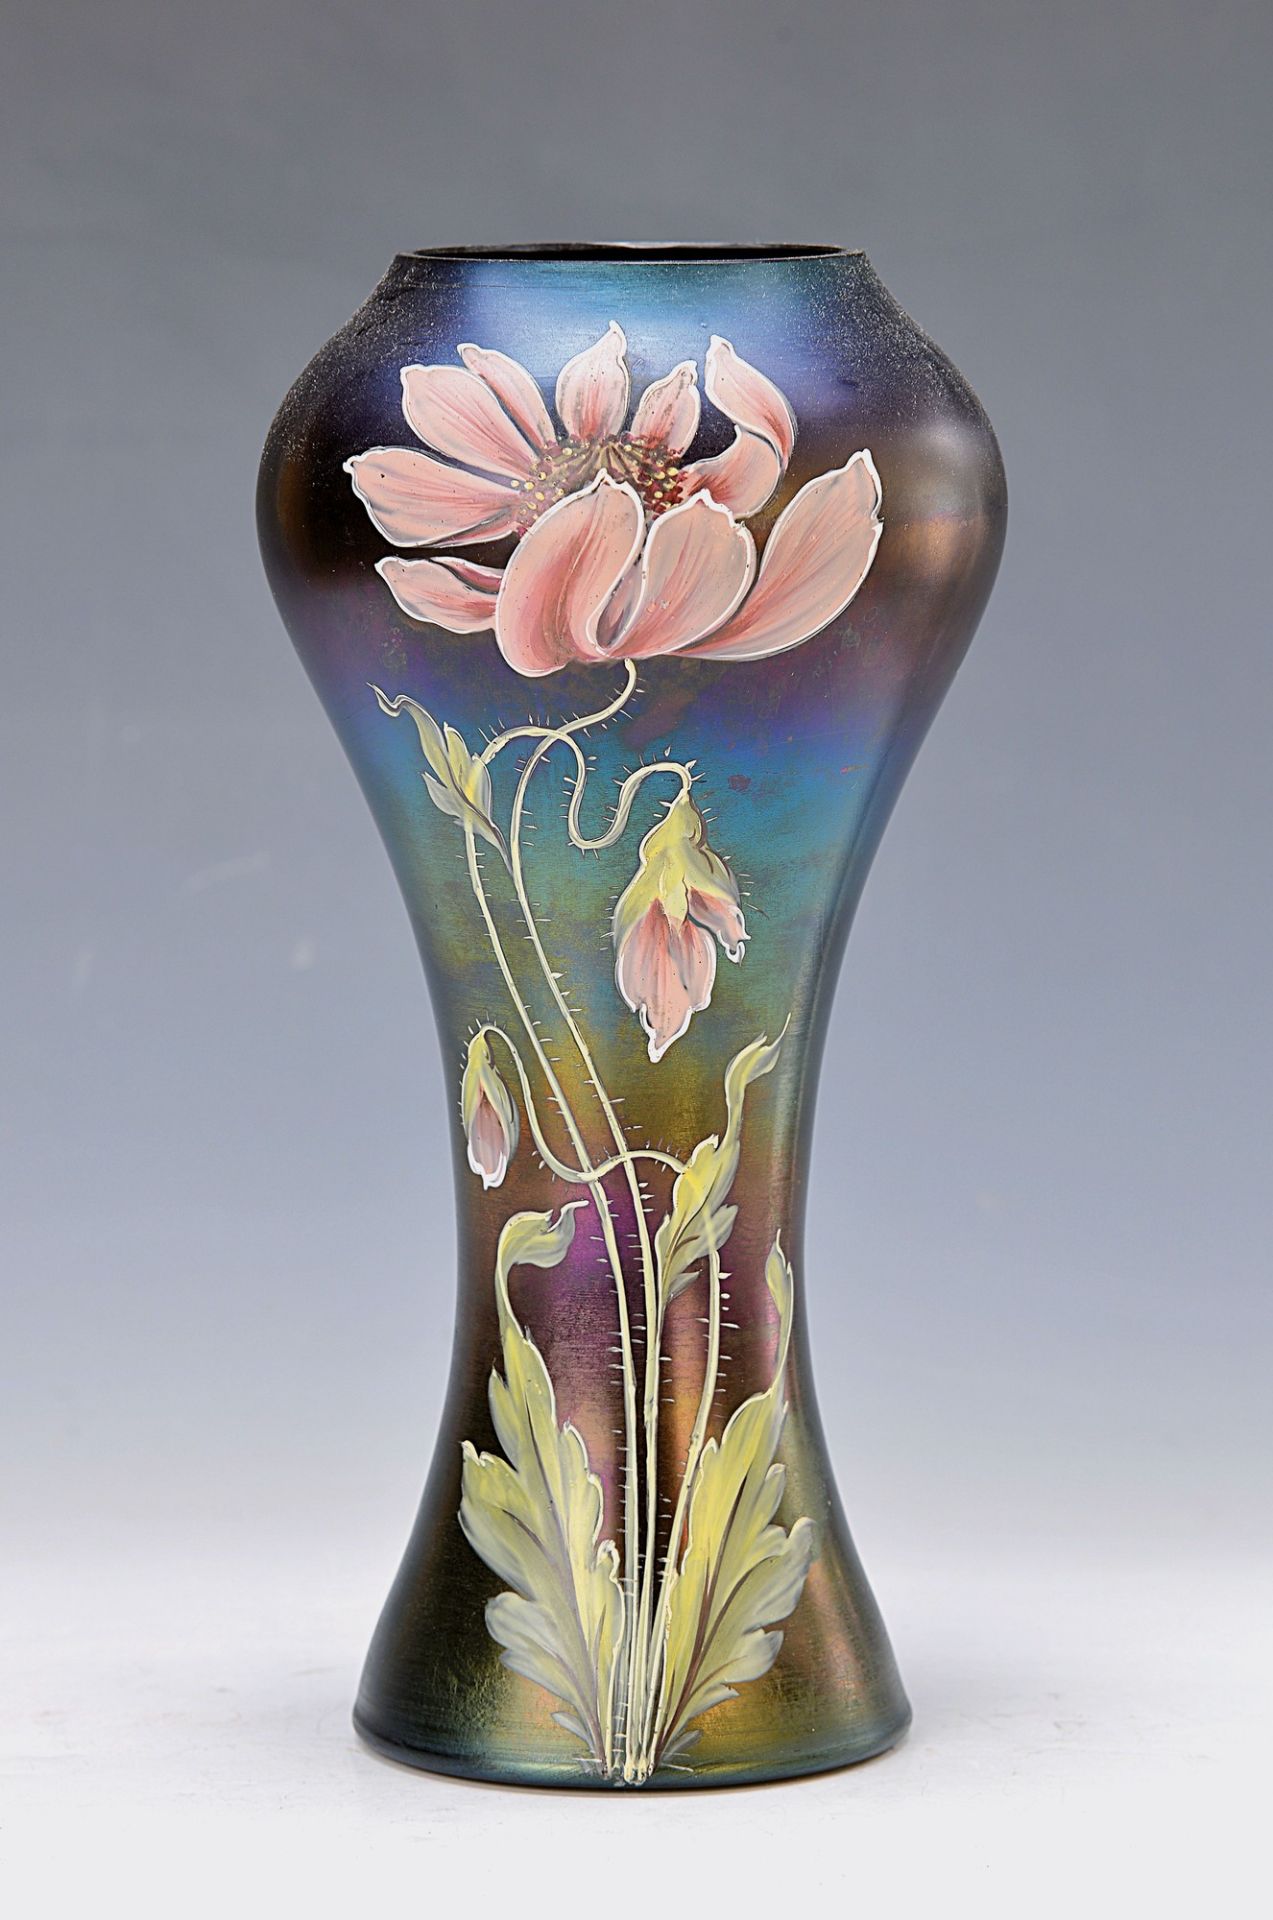 vase, Carl Schmoll of Eisenwerth (design of shape and decor), around 1900, colorless glass, red